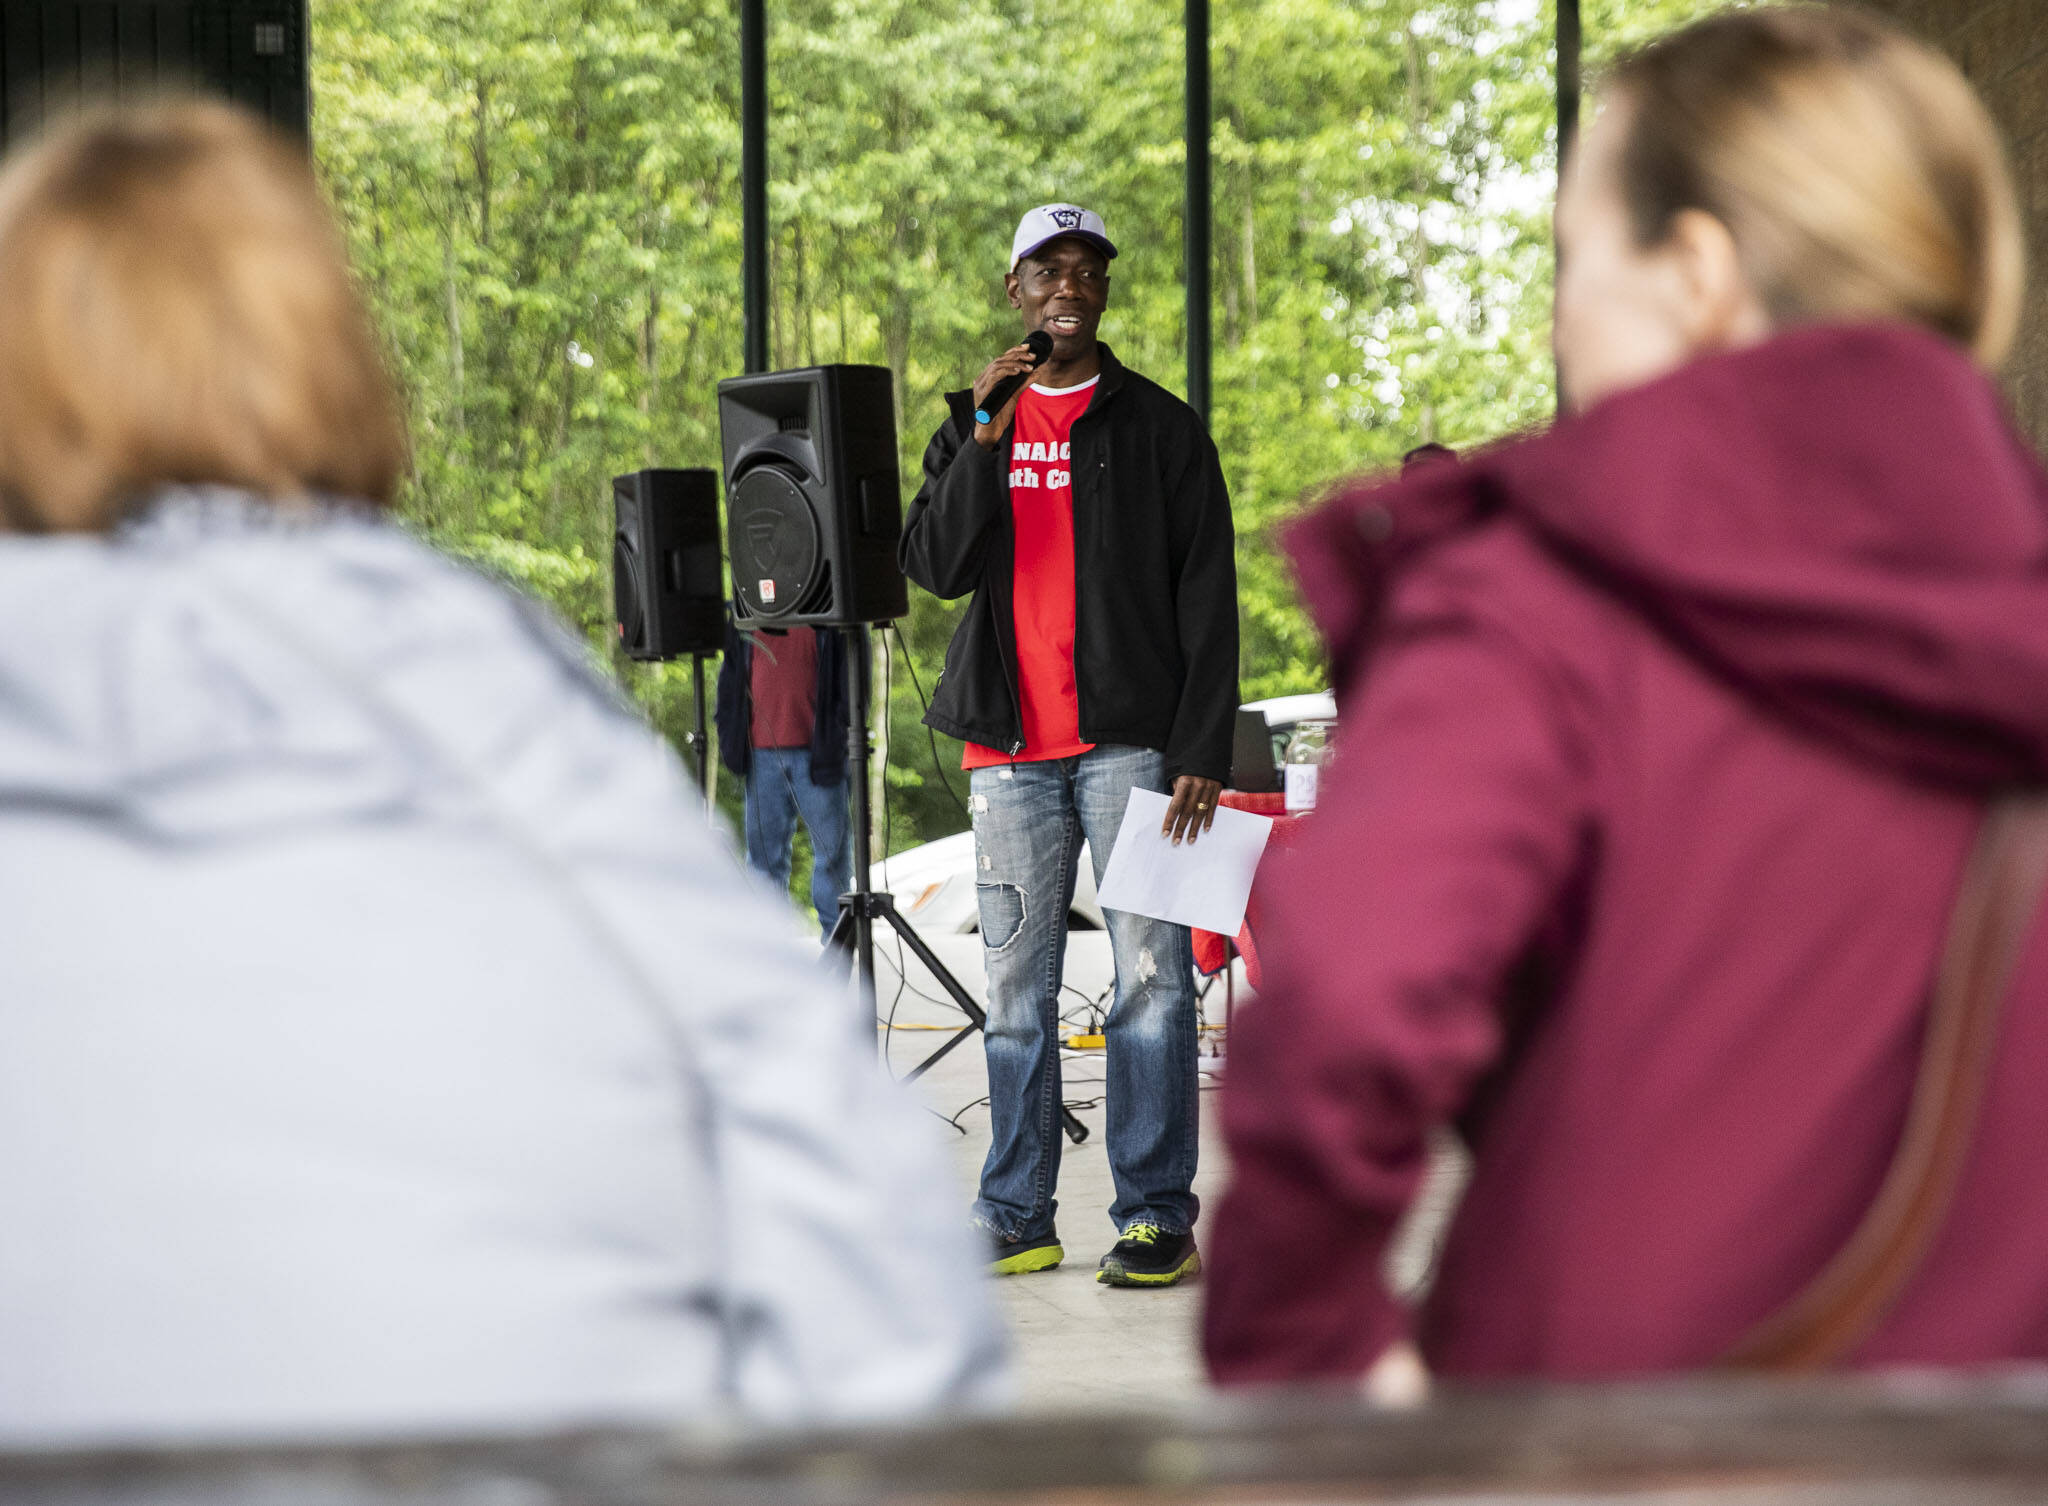 The lead organizer of the Snohomish Juneteenth celebration, John Agyapong, speaks to those gathered Saturday at Willis D. Tucker Park in Snohomish. (Olivia Vanni / The Herald)